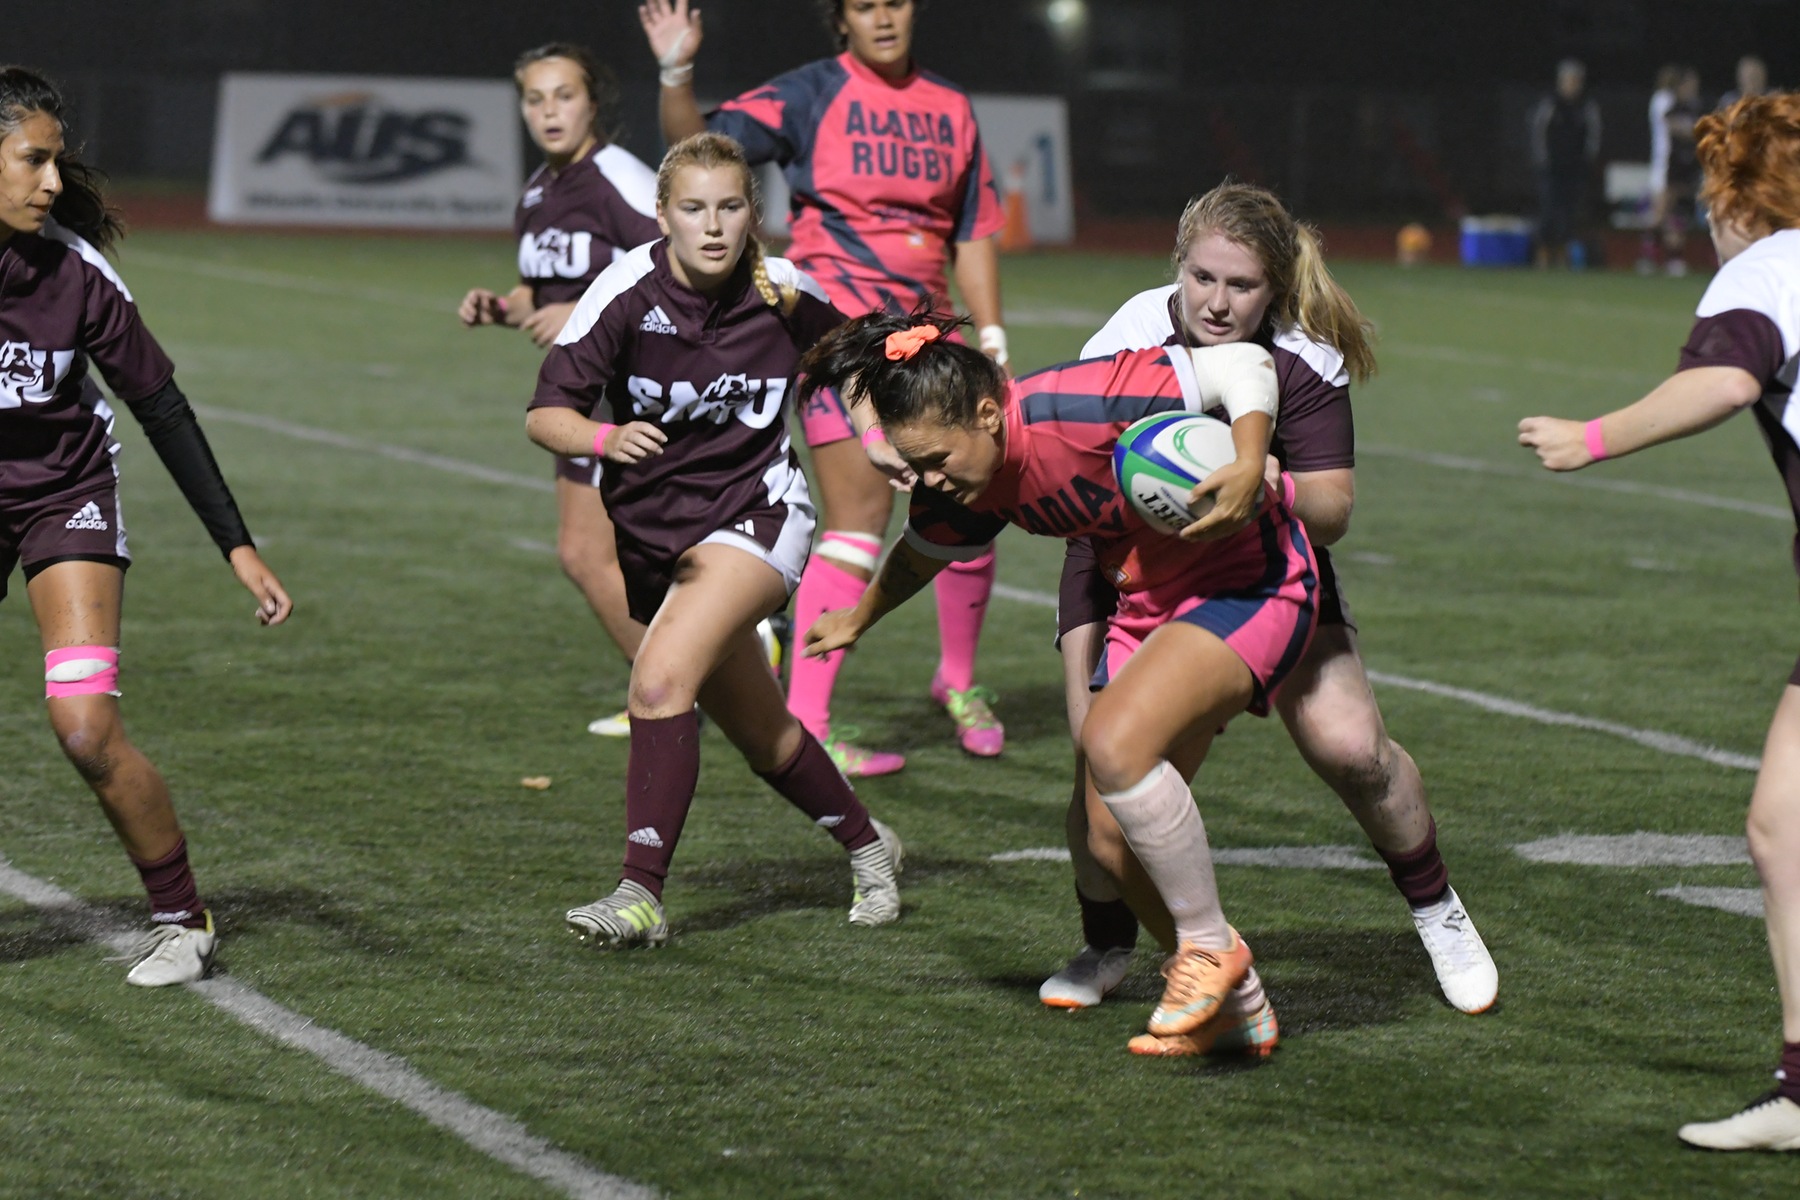 Huskies fall to Axewomen in rugby